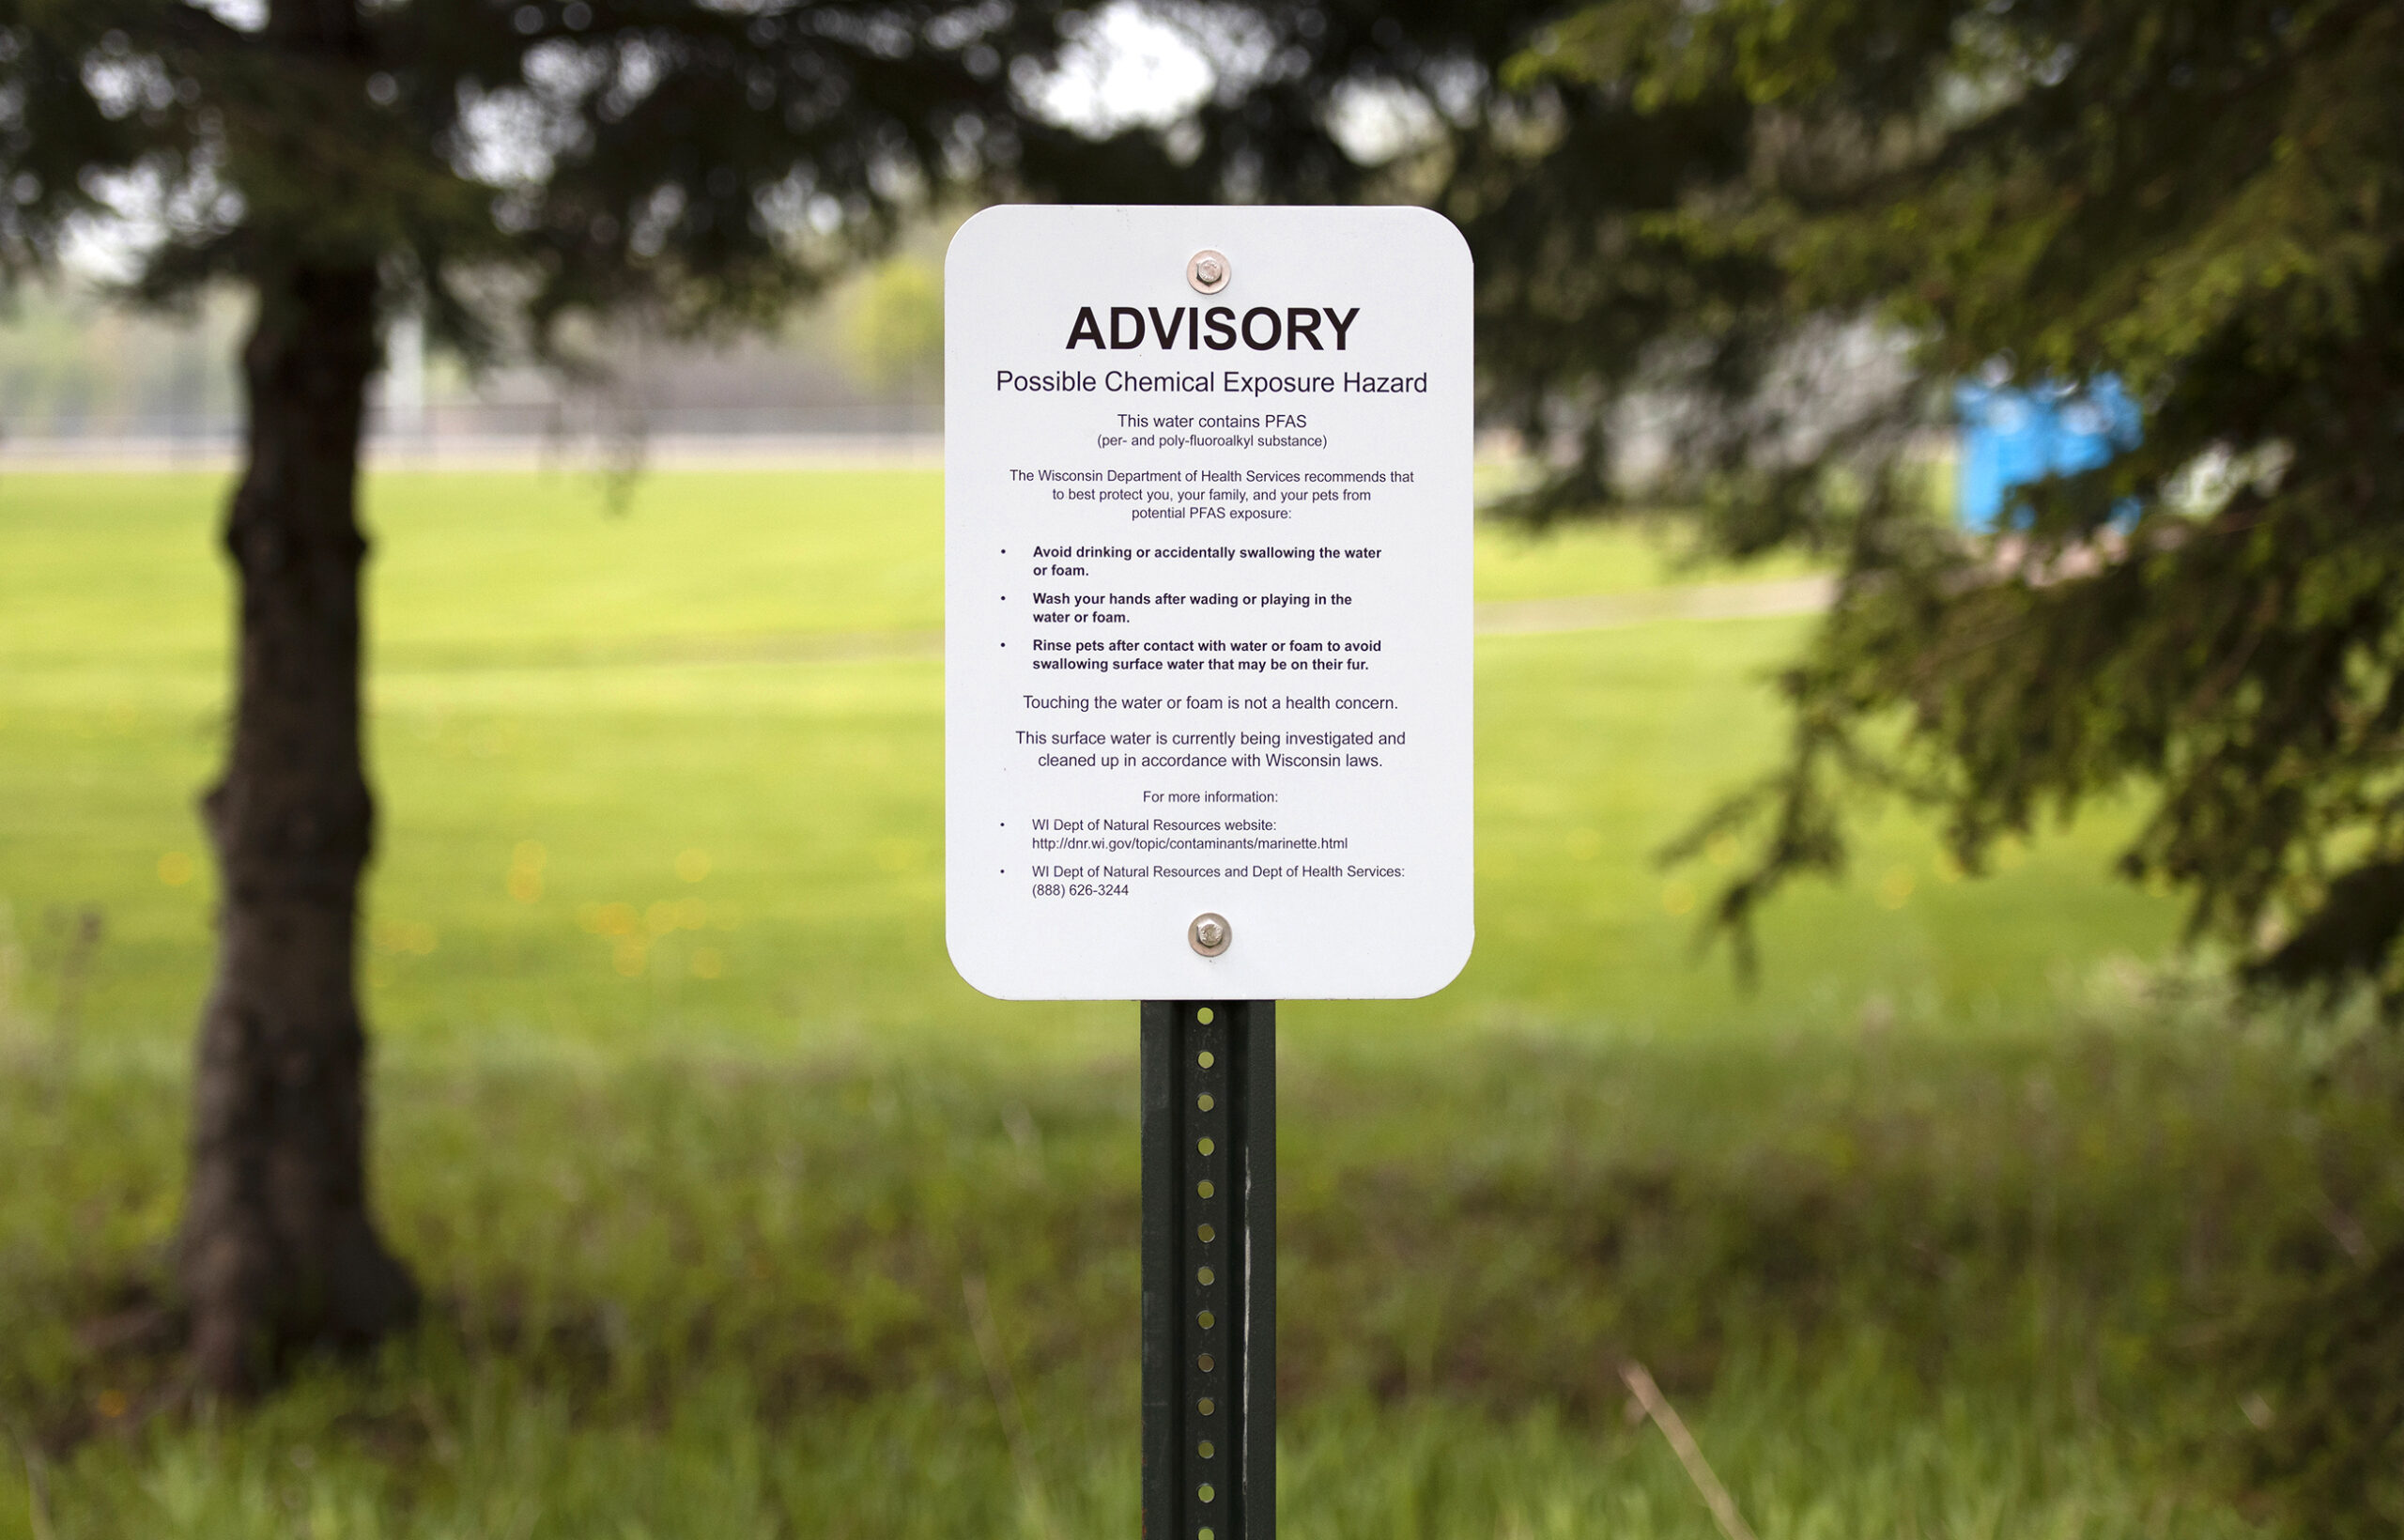 A sign says "ADVISORY" in large letters. The rest of the text warns people about PFAS in the water.